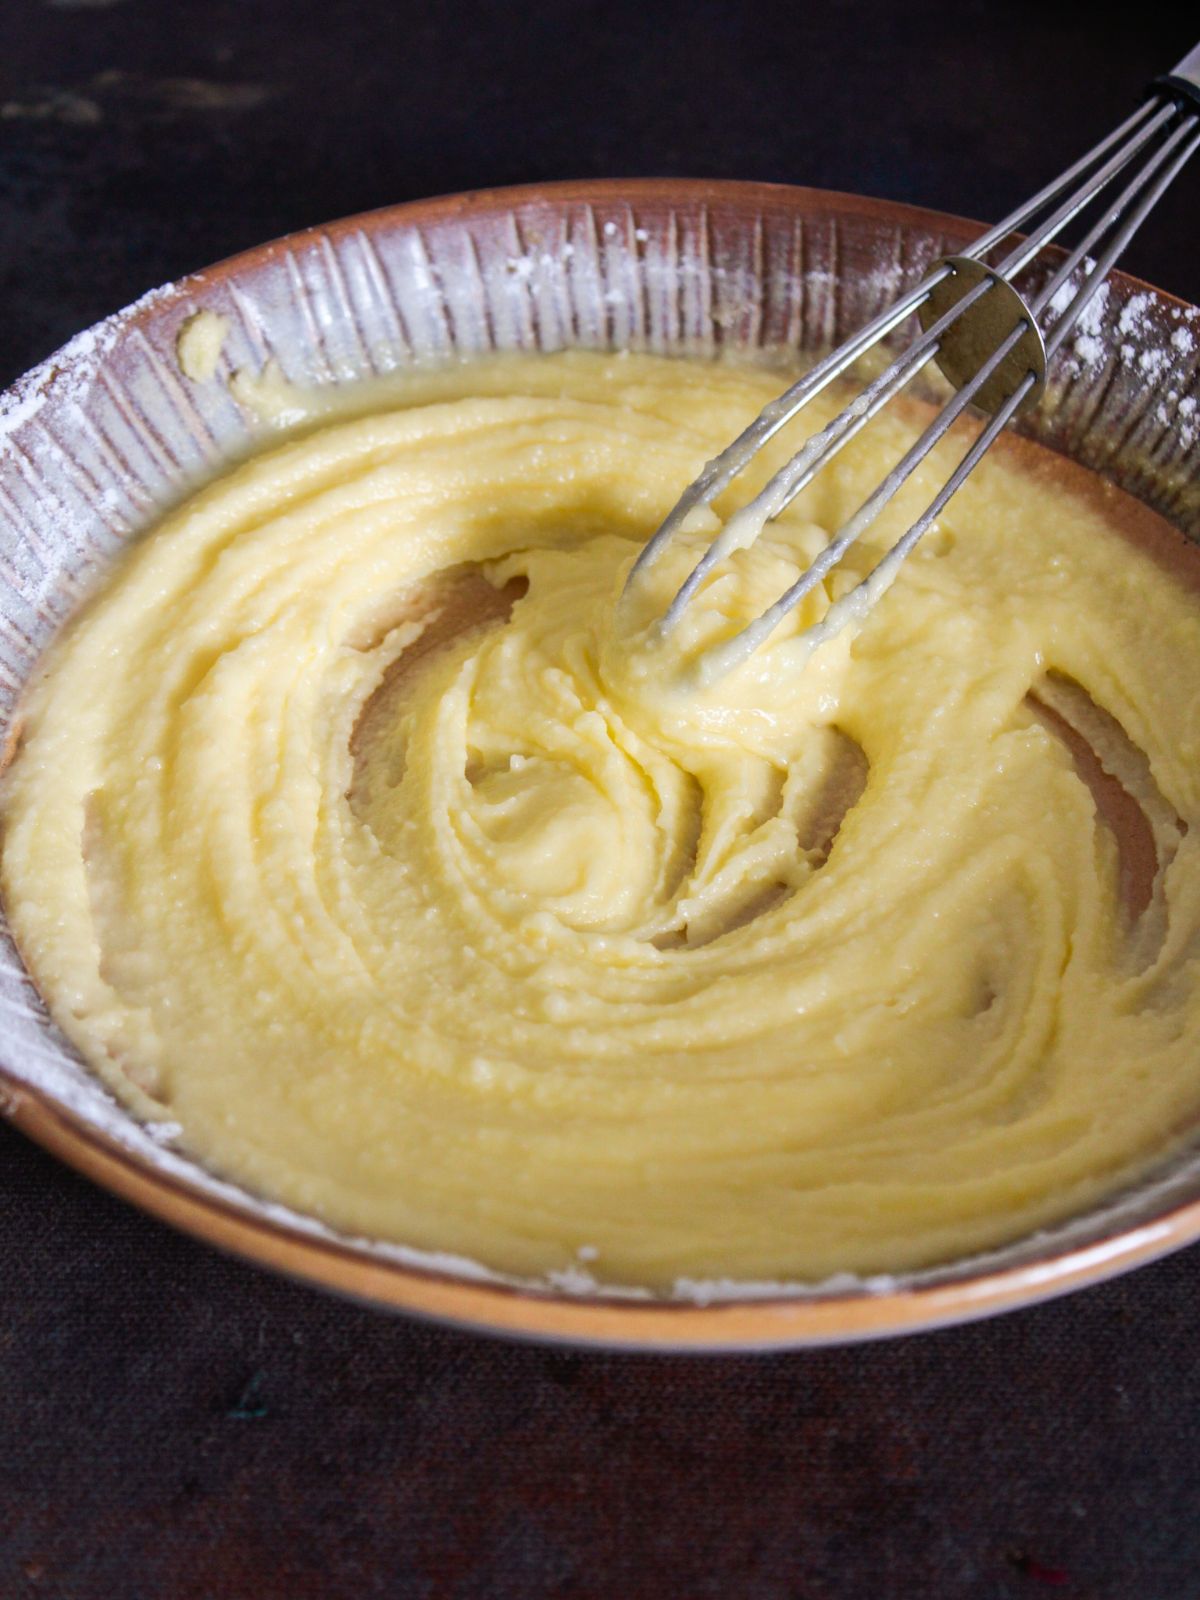 Whisk in a bowl of creamy butter